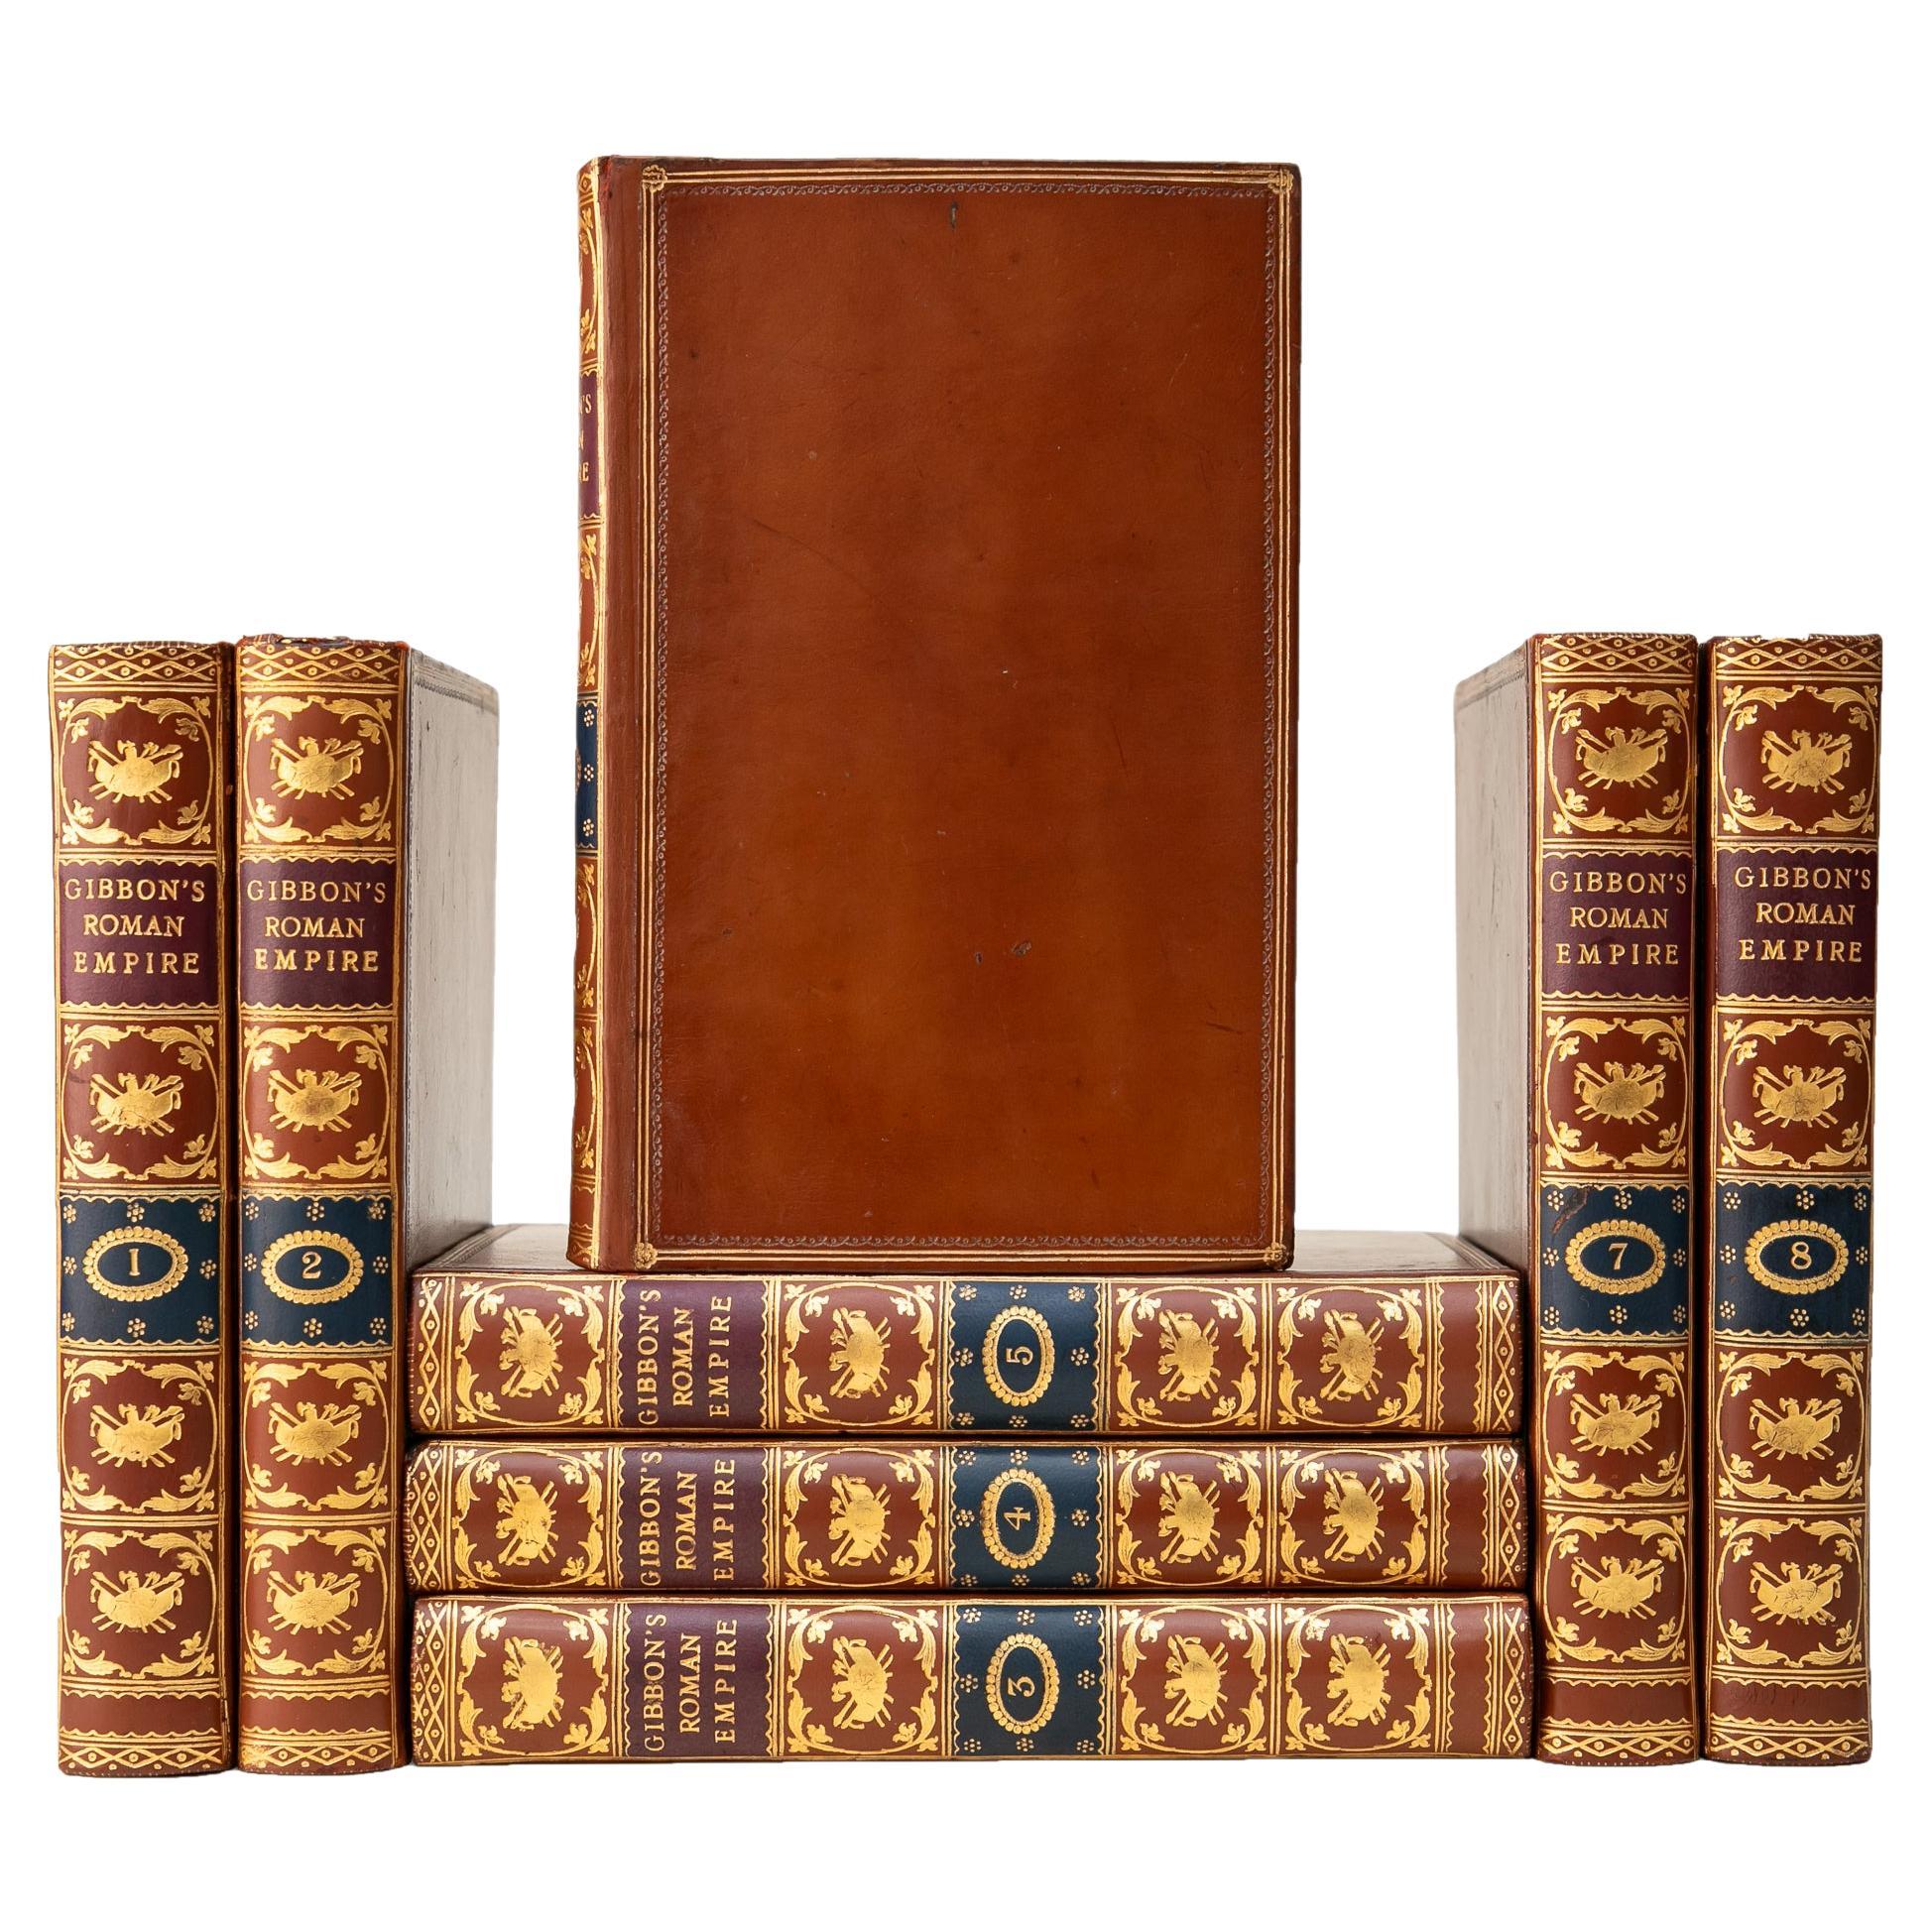 8 Volumes. Edward Gibbon, The Decline and Fall of the Roman Empire. For Sale